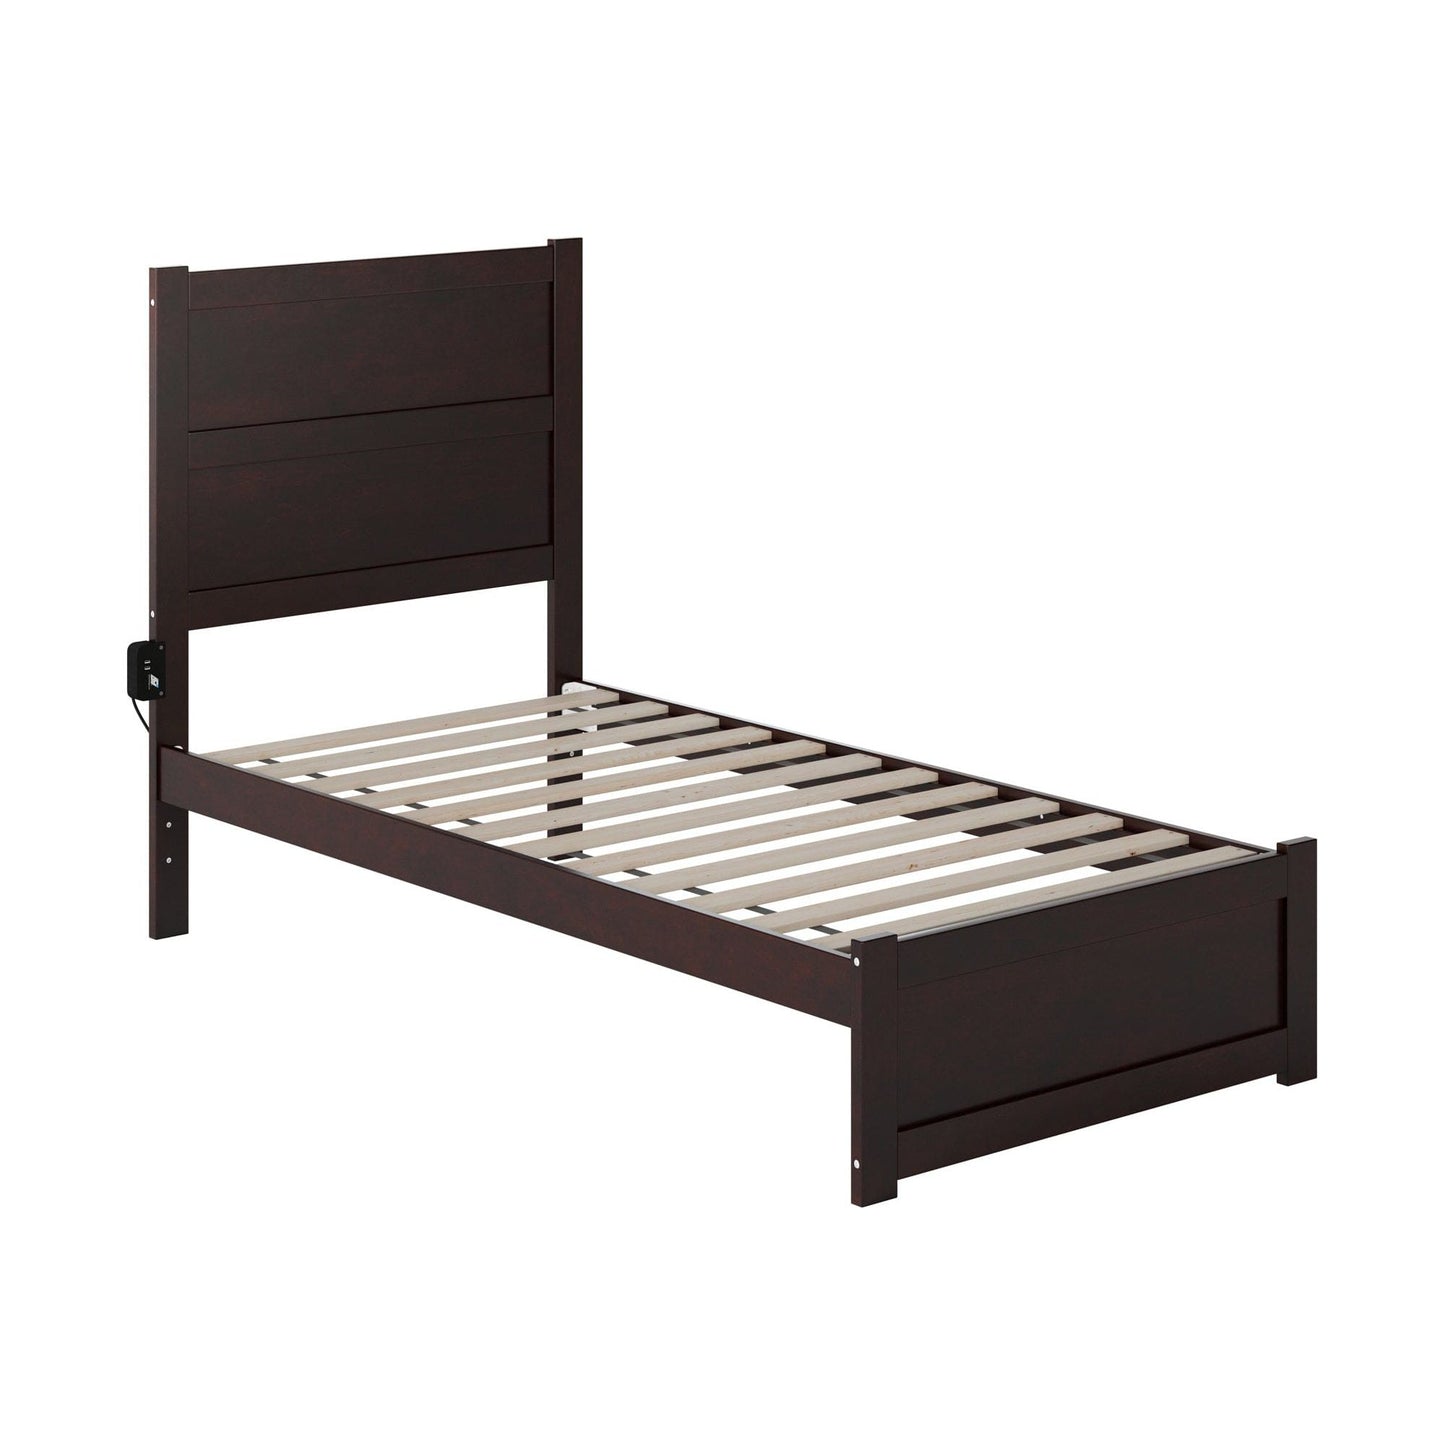 AFI Furnishings NoHo Twin Bed with Footboard in Espresso AG9160021